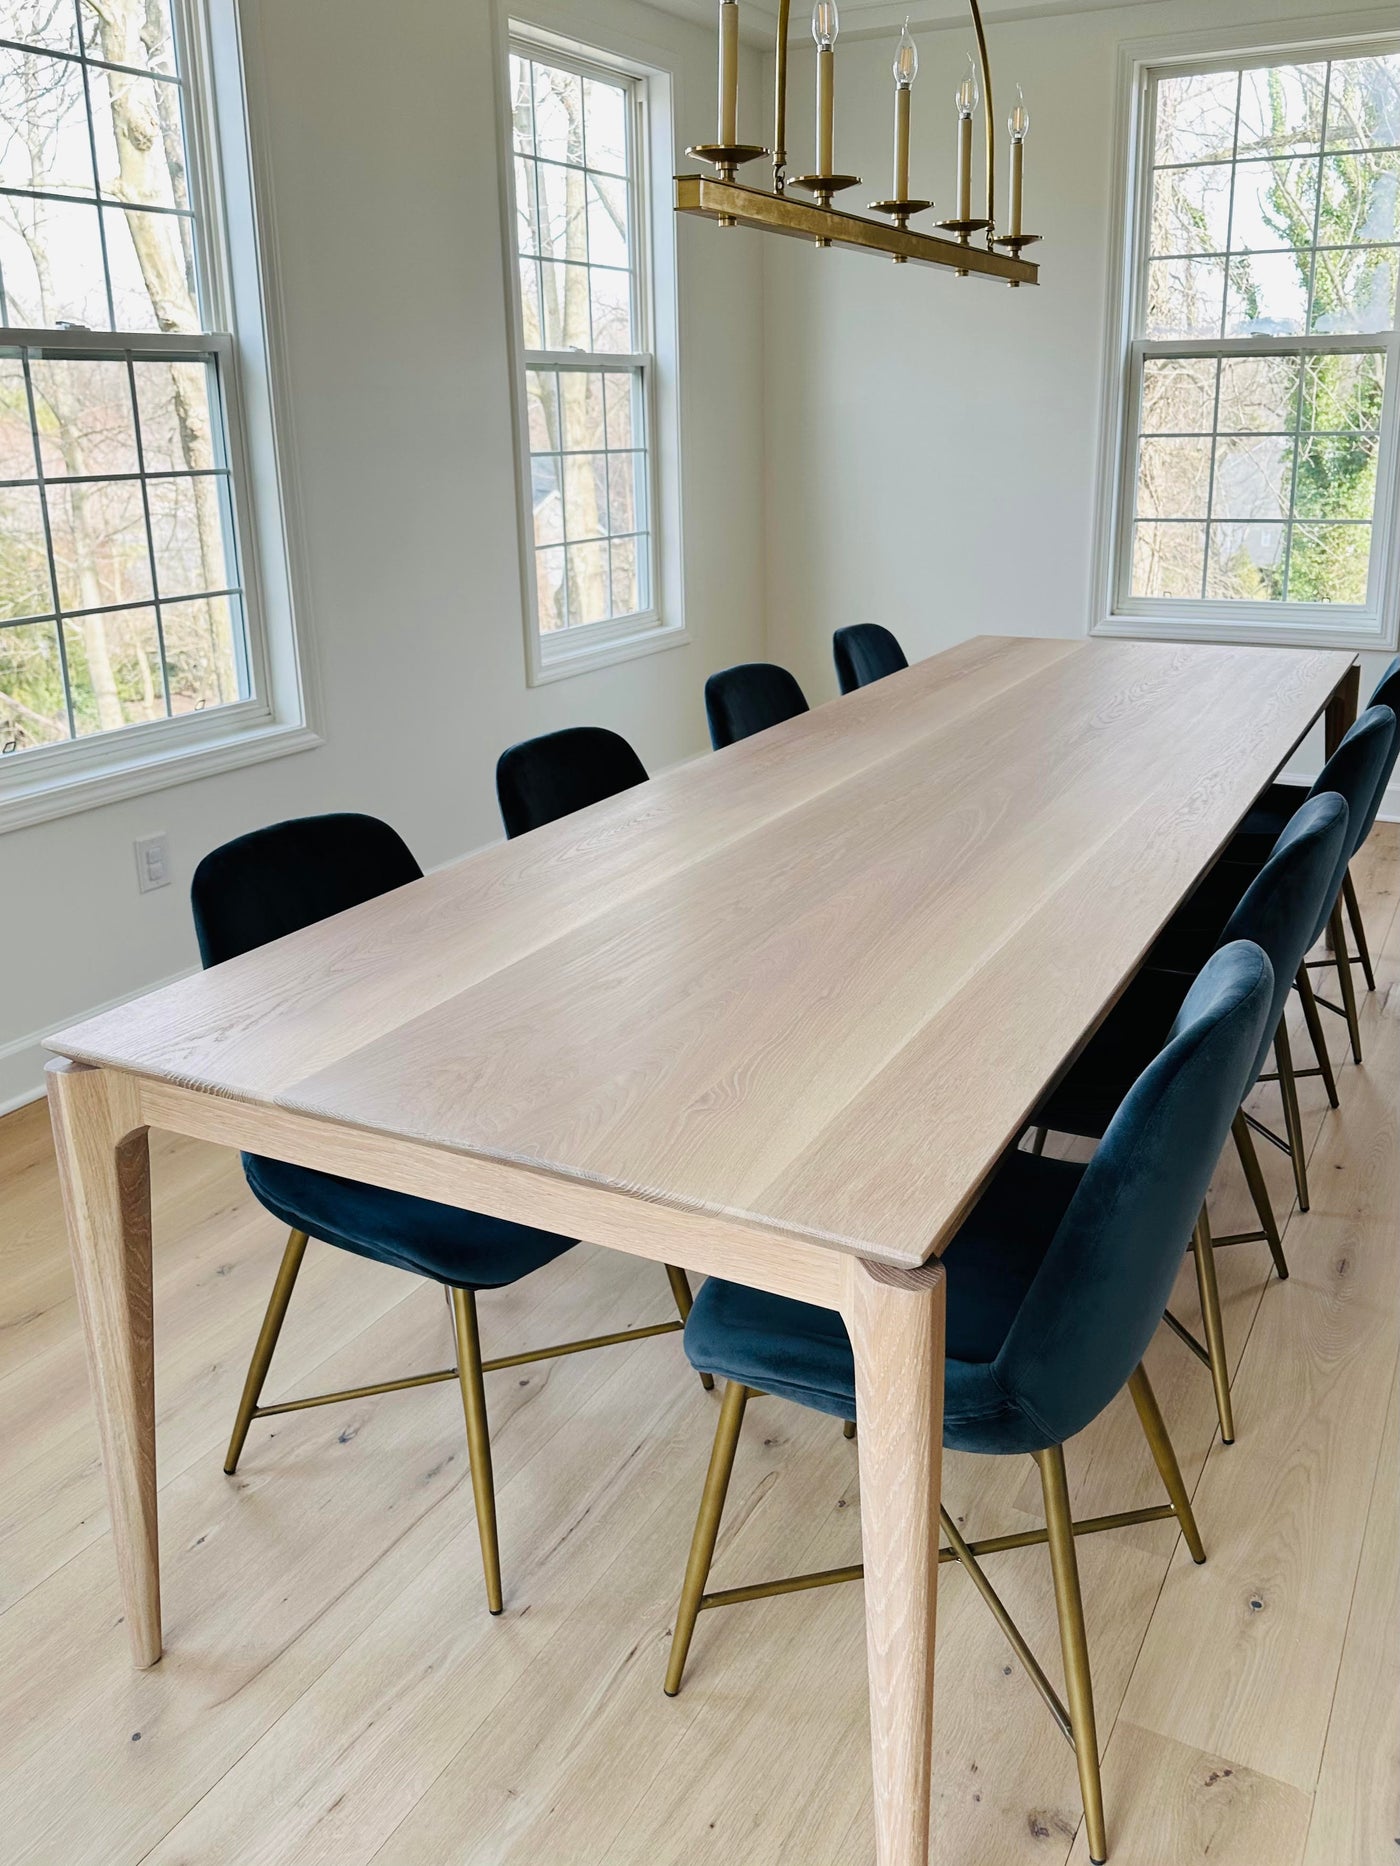 SARI in Walnut by Relic Table Co. handmade white oak dining table with 8 chairs modern dining room by interior designer